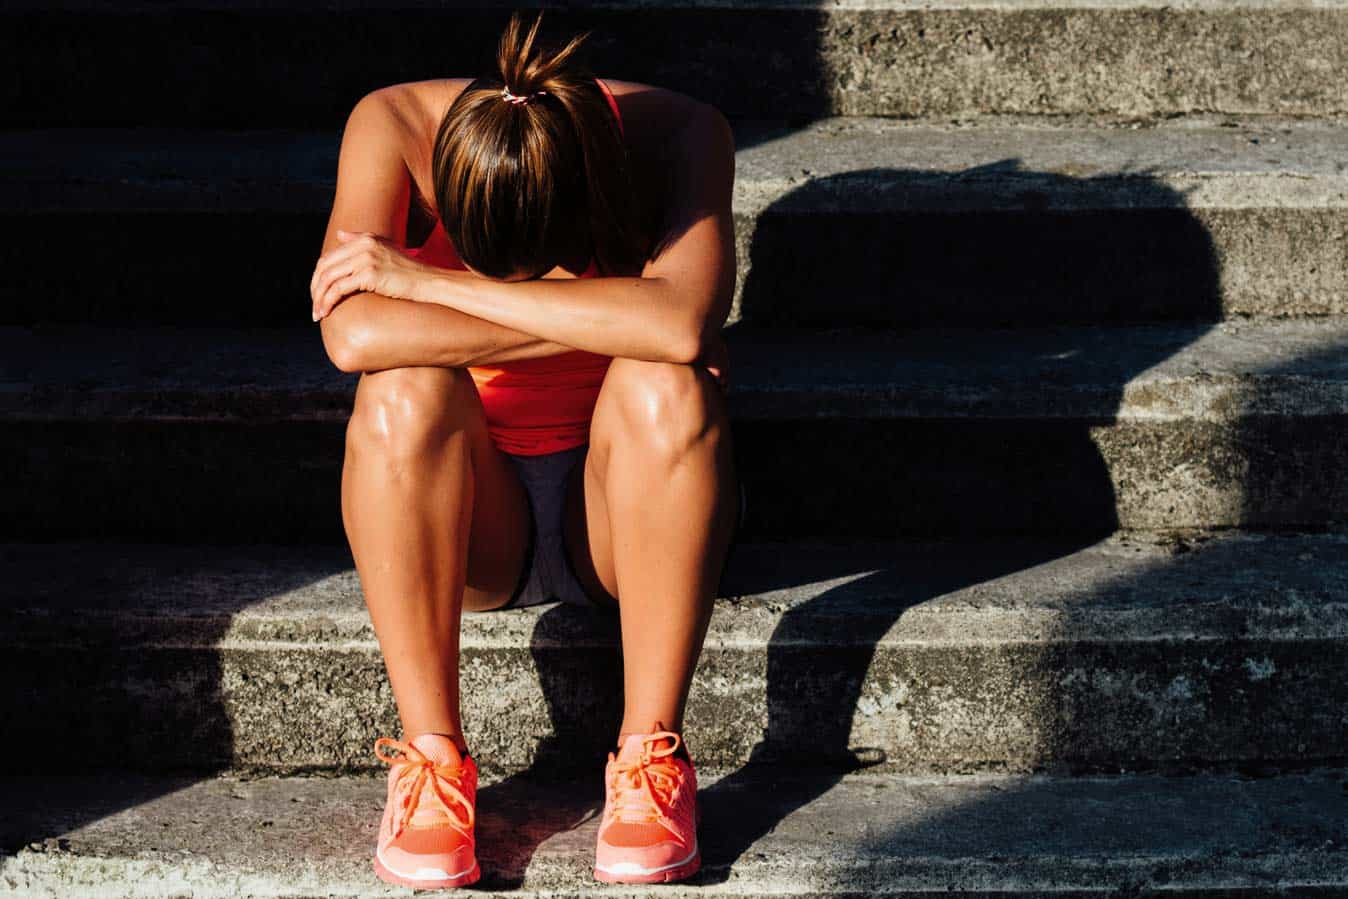 One-hour-of-exercise-per-week-can-thwart-depression2